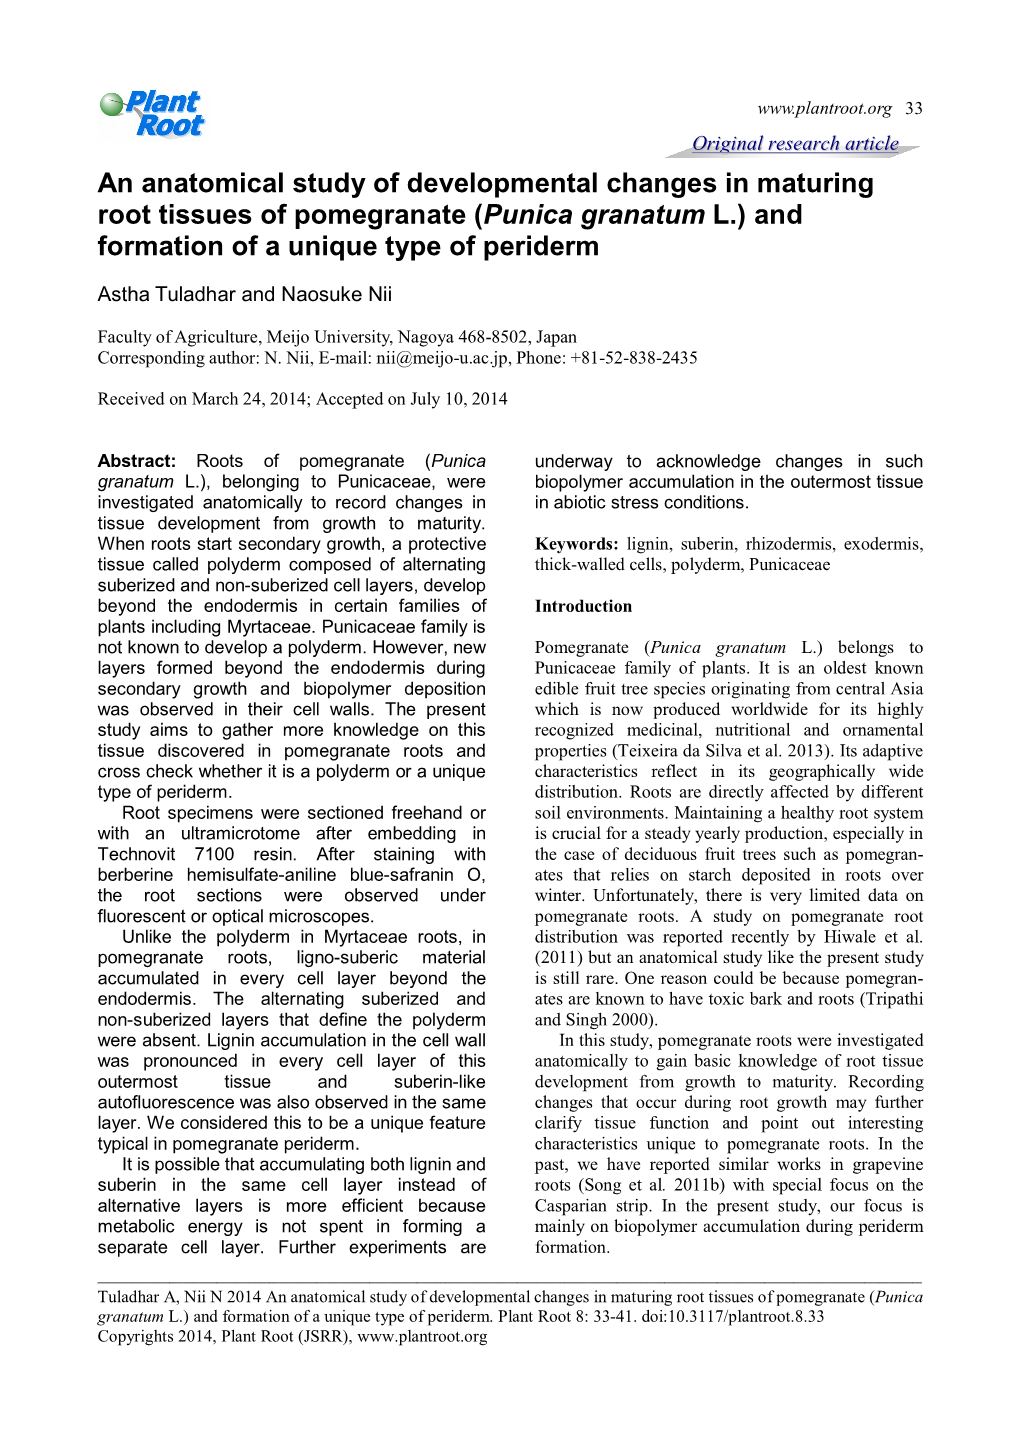 An Anatomical Study of Developmental Changes in Maturing Root Tissues of Pomegranate (Punica Granatum L.) and Formation of a Unique Type of Periderm